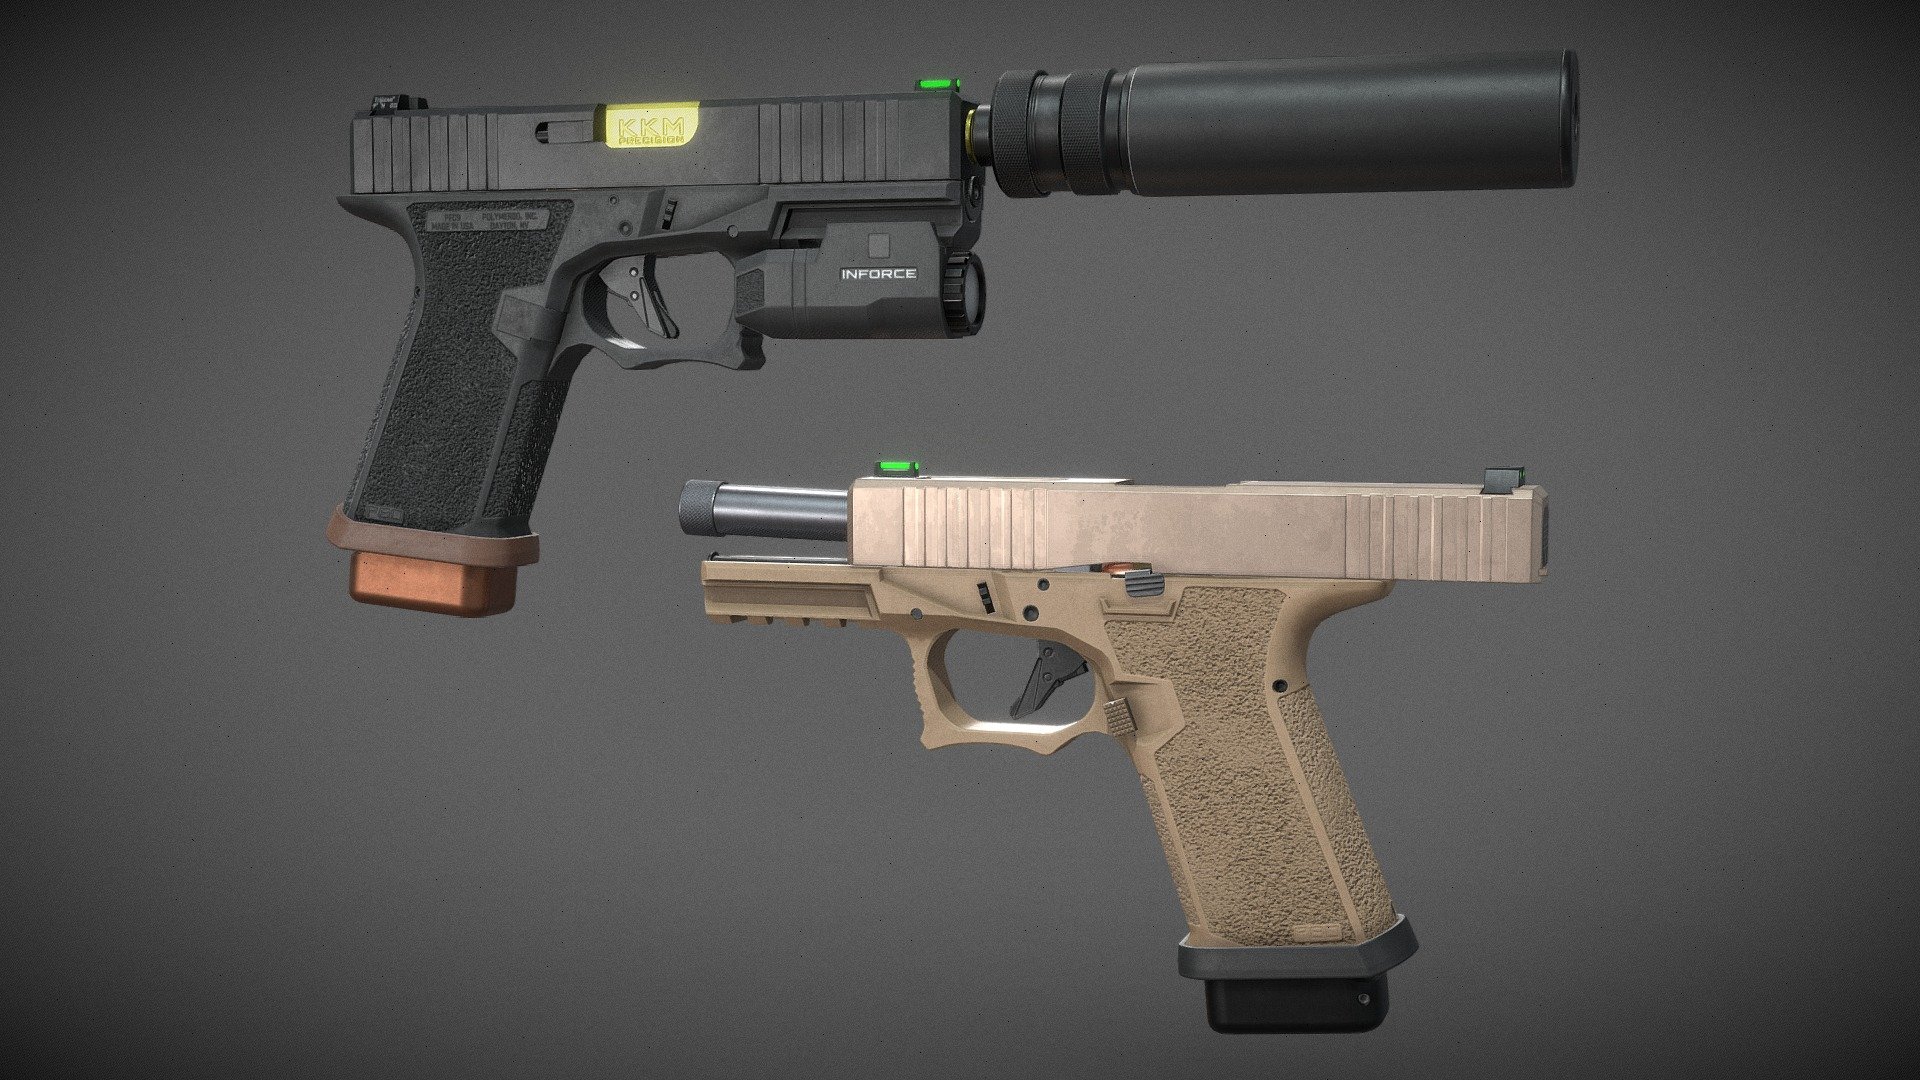 3D showcase of a custom PFC9 (G19) Handgun I modelled. All parts were modelled in reference to real life aftermarket parts for the popular handgun brand that rhymes with block.

Aftermarket parts: Polymer80 Frame, TTI magwell flare, +3 TTI mag base plate, Brownell slide, Trijicon rear sight, Ameriglo Fibre Optic front sight, KKM Threaded barrel.

Attachments: B&amp;T Impuls IIA Suppressor, Inforce APLc Flashlight.

Production Period: 20th June 2023 to 3rd July 2023

Modelled in Blender, textured in Substance Painter. PBR materials.

Artstation: https://www.artstation.com/artwork/VJ1rZX - P80 PFC9 (G19) Custom Build - 3D model by 8sianDude (@haoliu95) 3d model